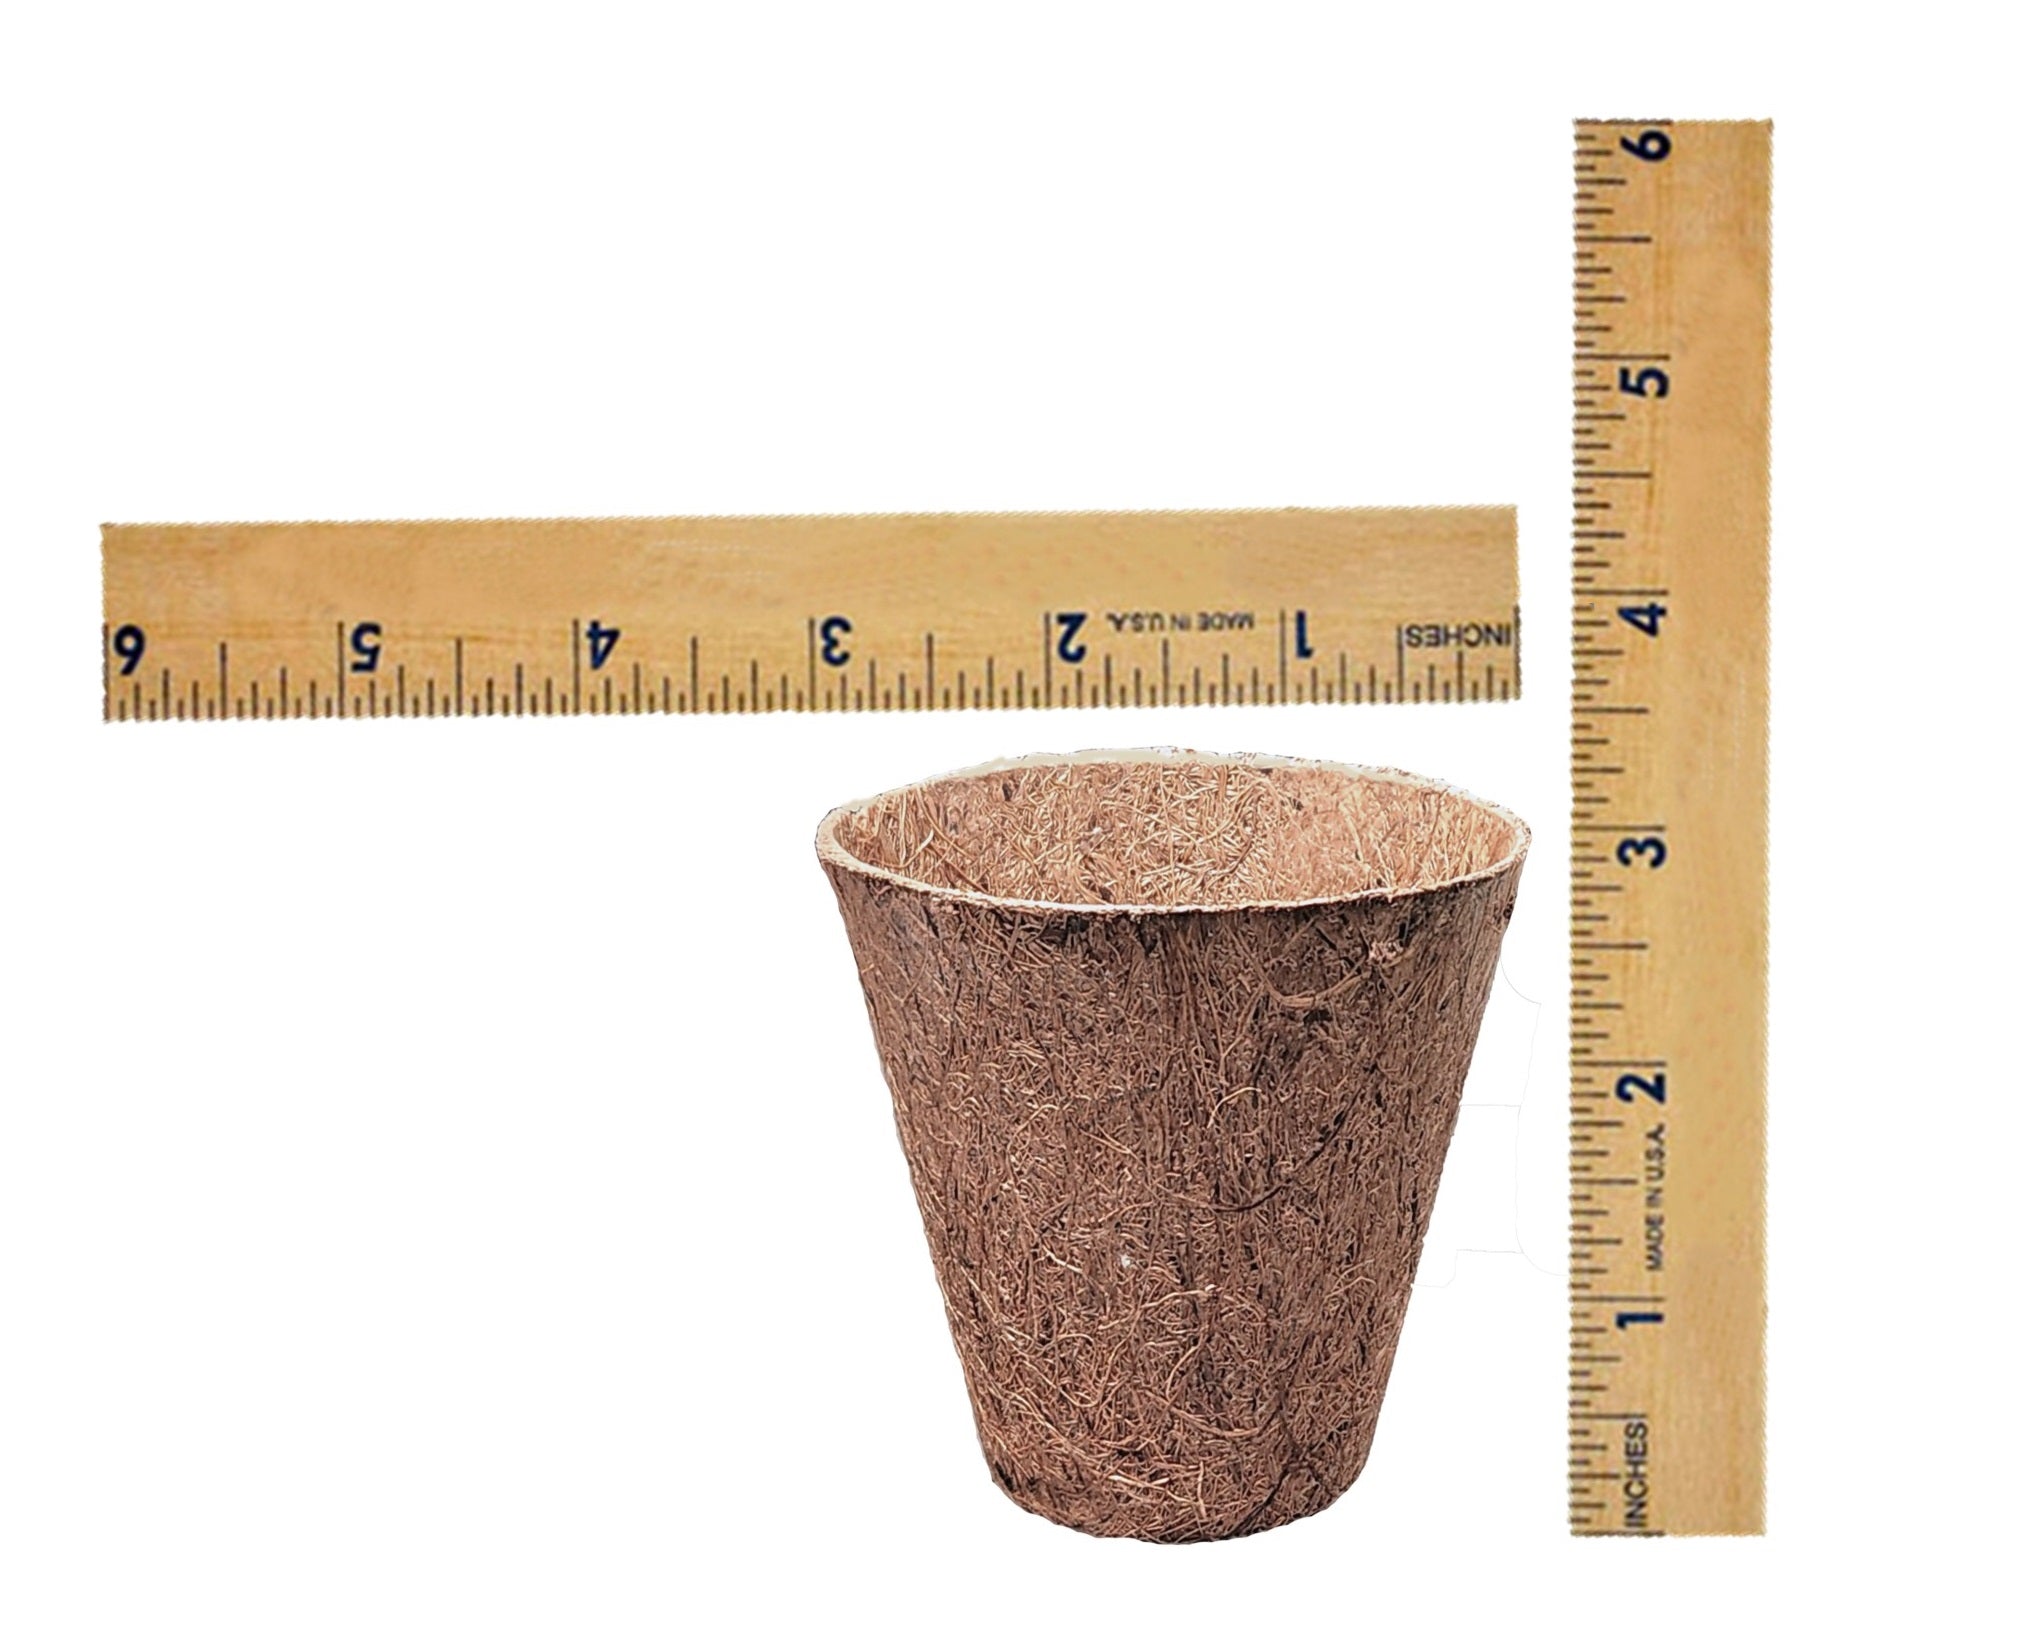 Deepthi Coco Coir Nursery Pots – Biodegradable Peat Pots for Seed Starter and Seedling - Mini Planter Cups for Indoor, Outdoor